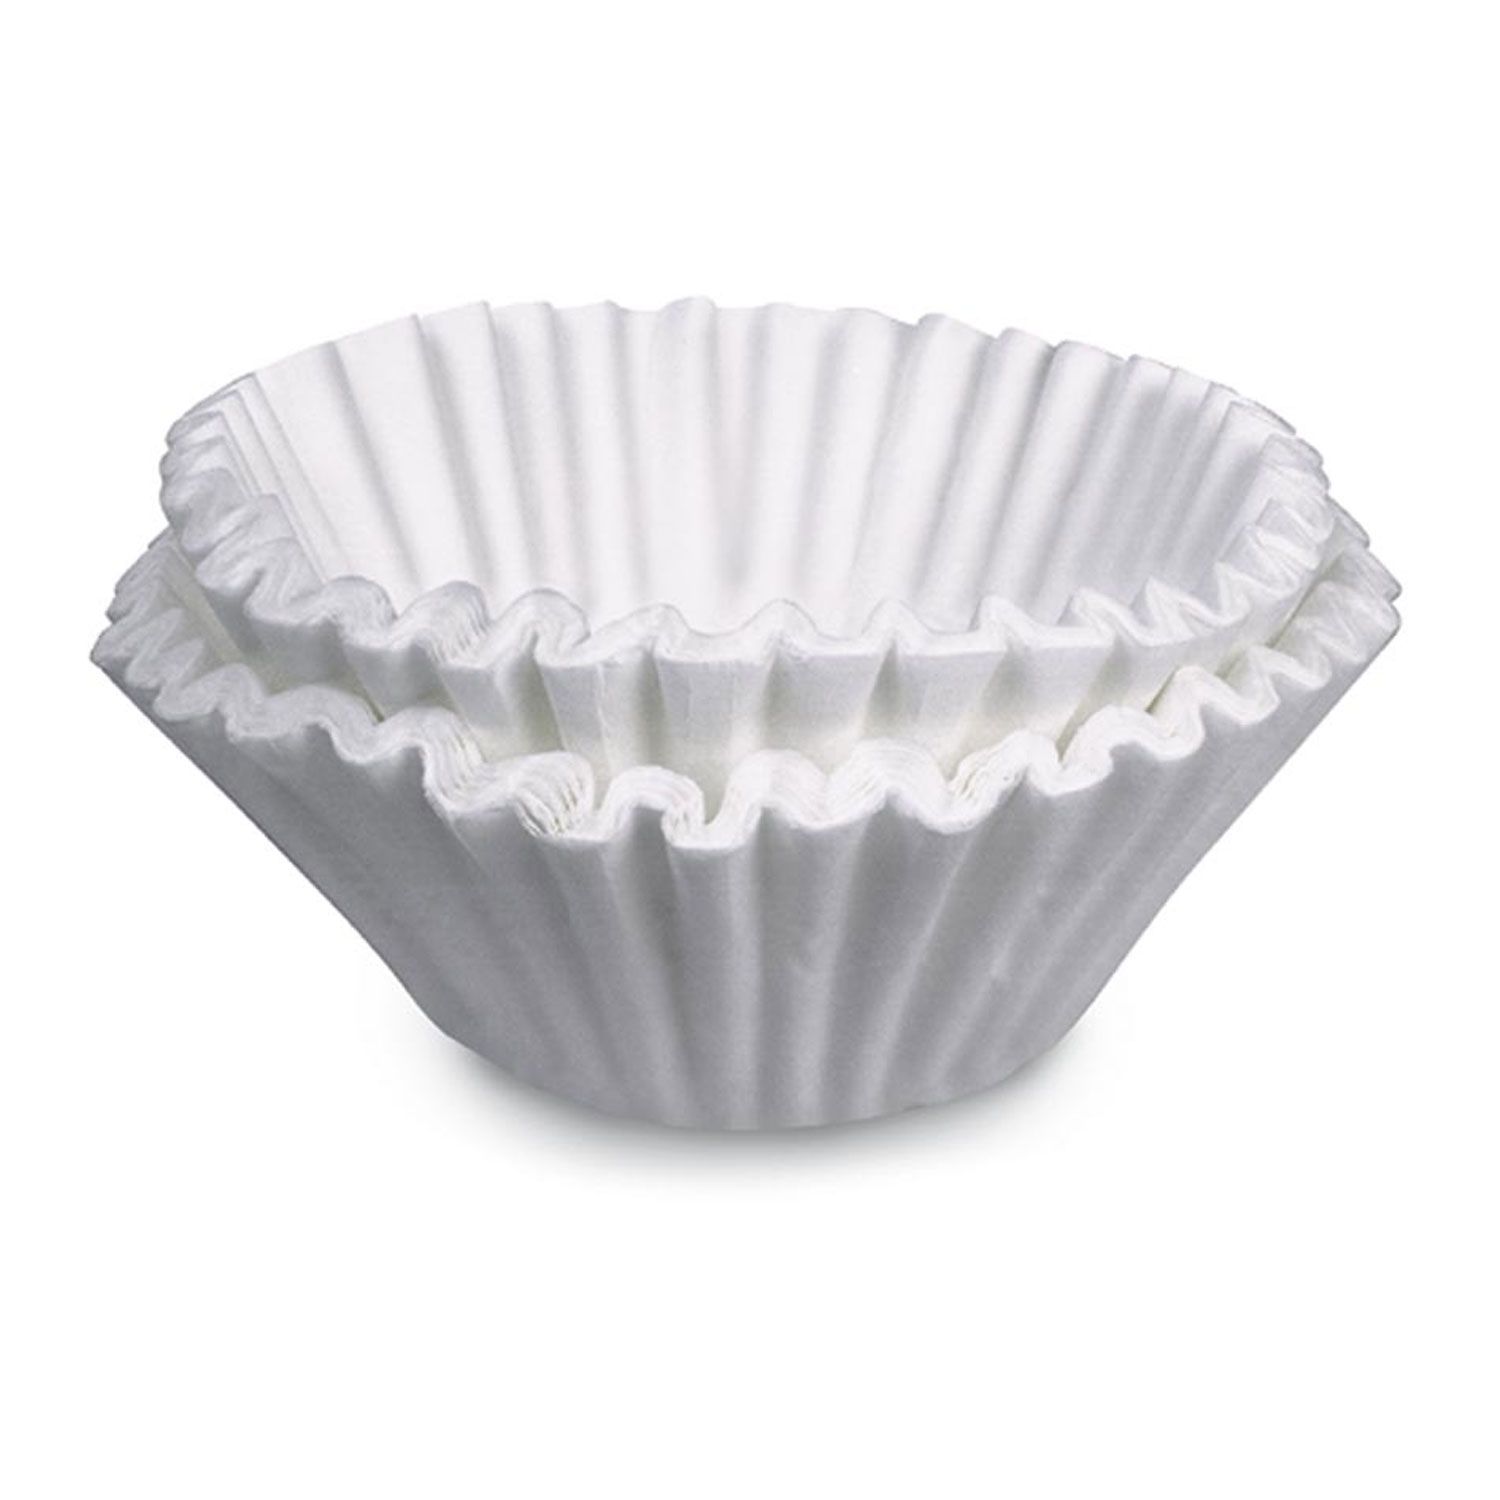 Brew Rite Coffee Filter - 1,000 Count